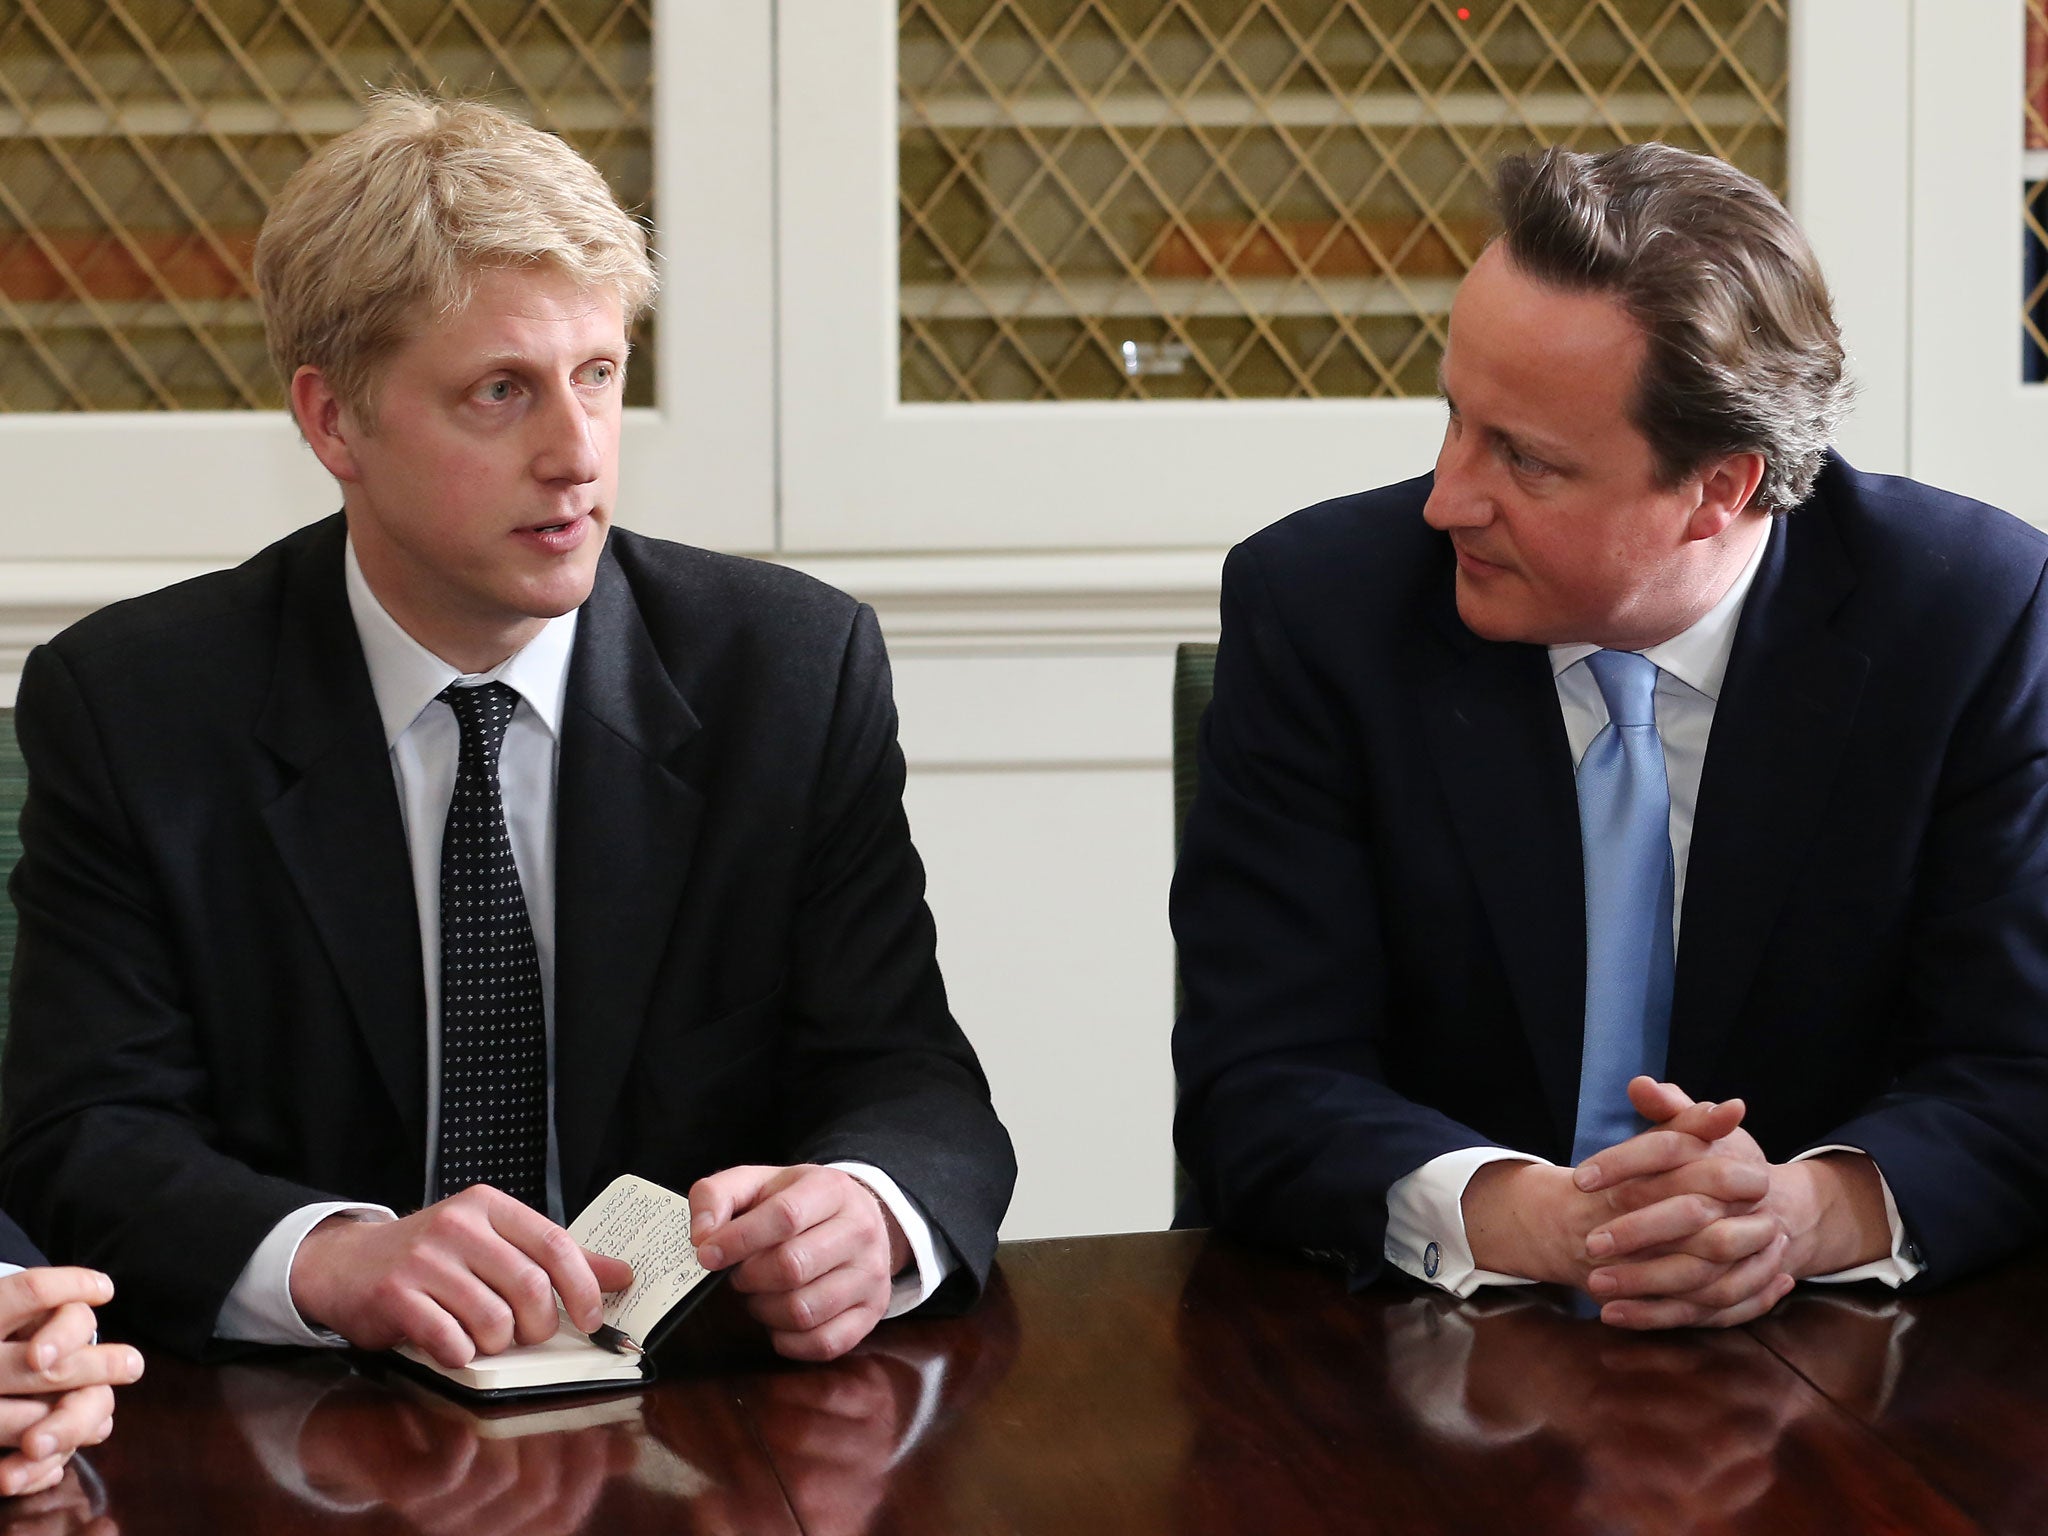 Prime Minister David Cameron (right) talks to Jo Johnson, his new head of policy, during a meeting at 10 Downing Street on April 25, 2013 in London, England. The Prime Minister has appointed Jo Johnson the younger brother of the Mayor of London, Boris Johnson to be his new Head of Policy.